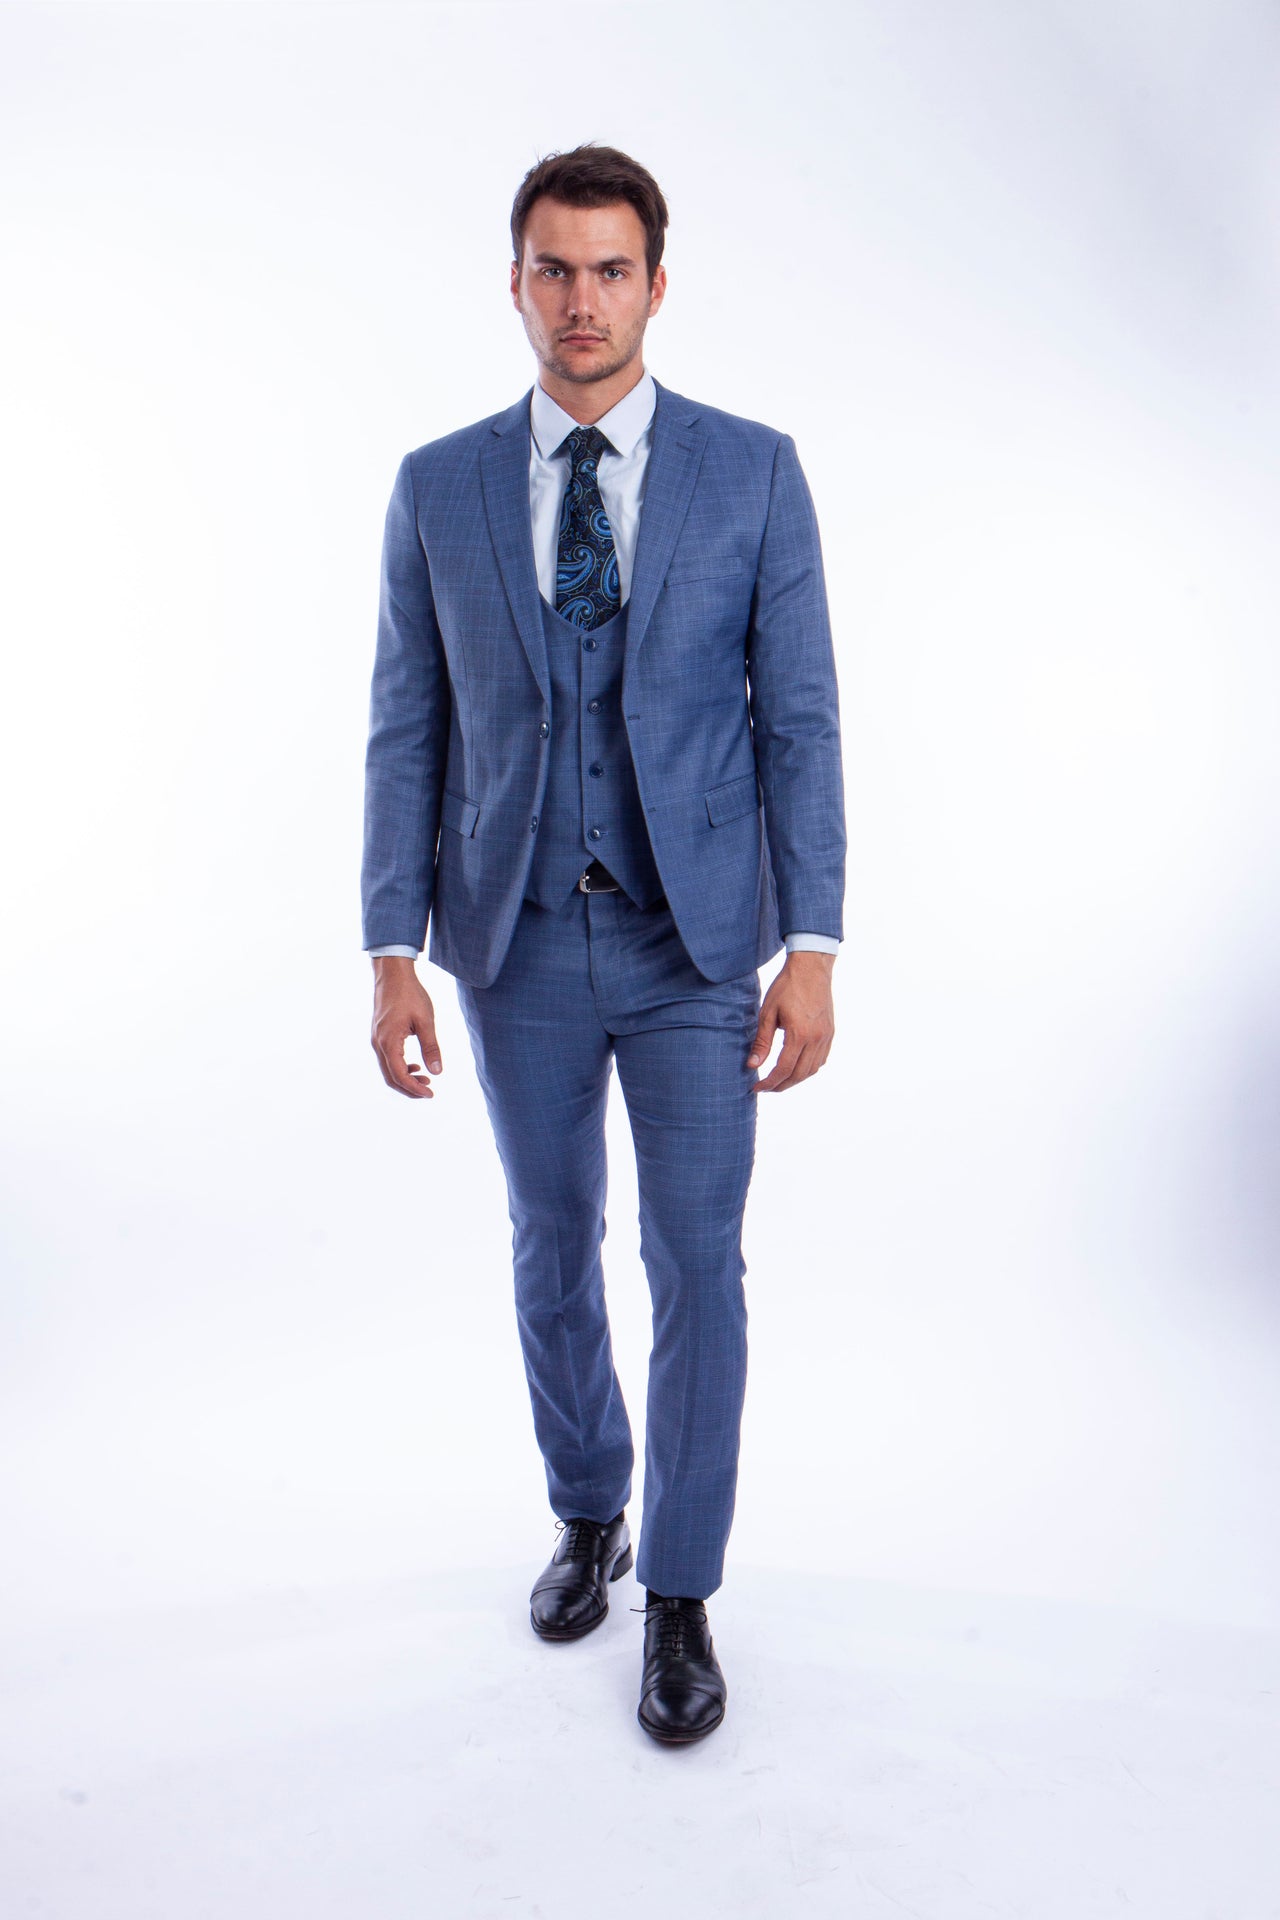 Med Blue Suit For Men Formal Suits For All Ocassions - Hattitude